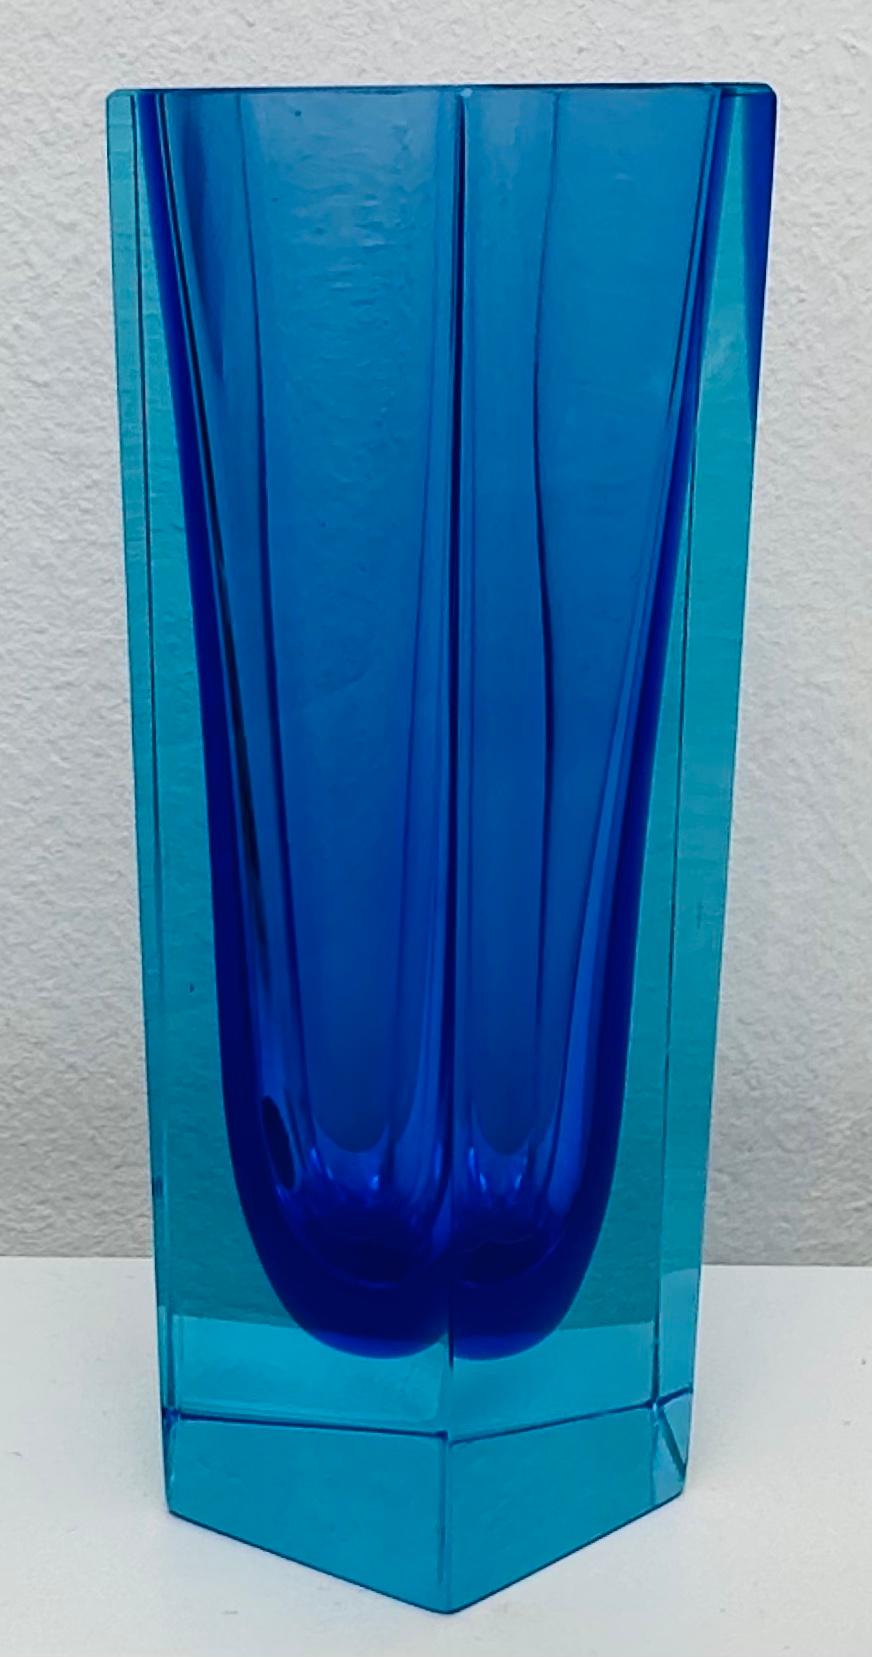 A very unusual and Murano blue and turquoise glass vase. The original round foil sticker is visible on one side marked: Murano Made In Italy. A beautiful decorative piece perfect for a glass display case or shelf where the light can shine through it